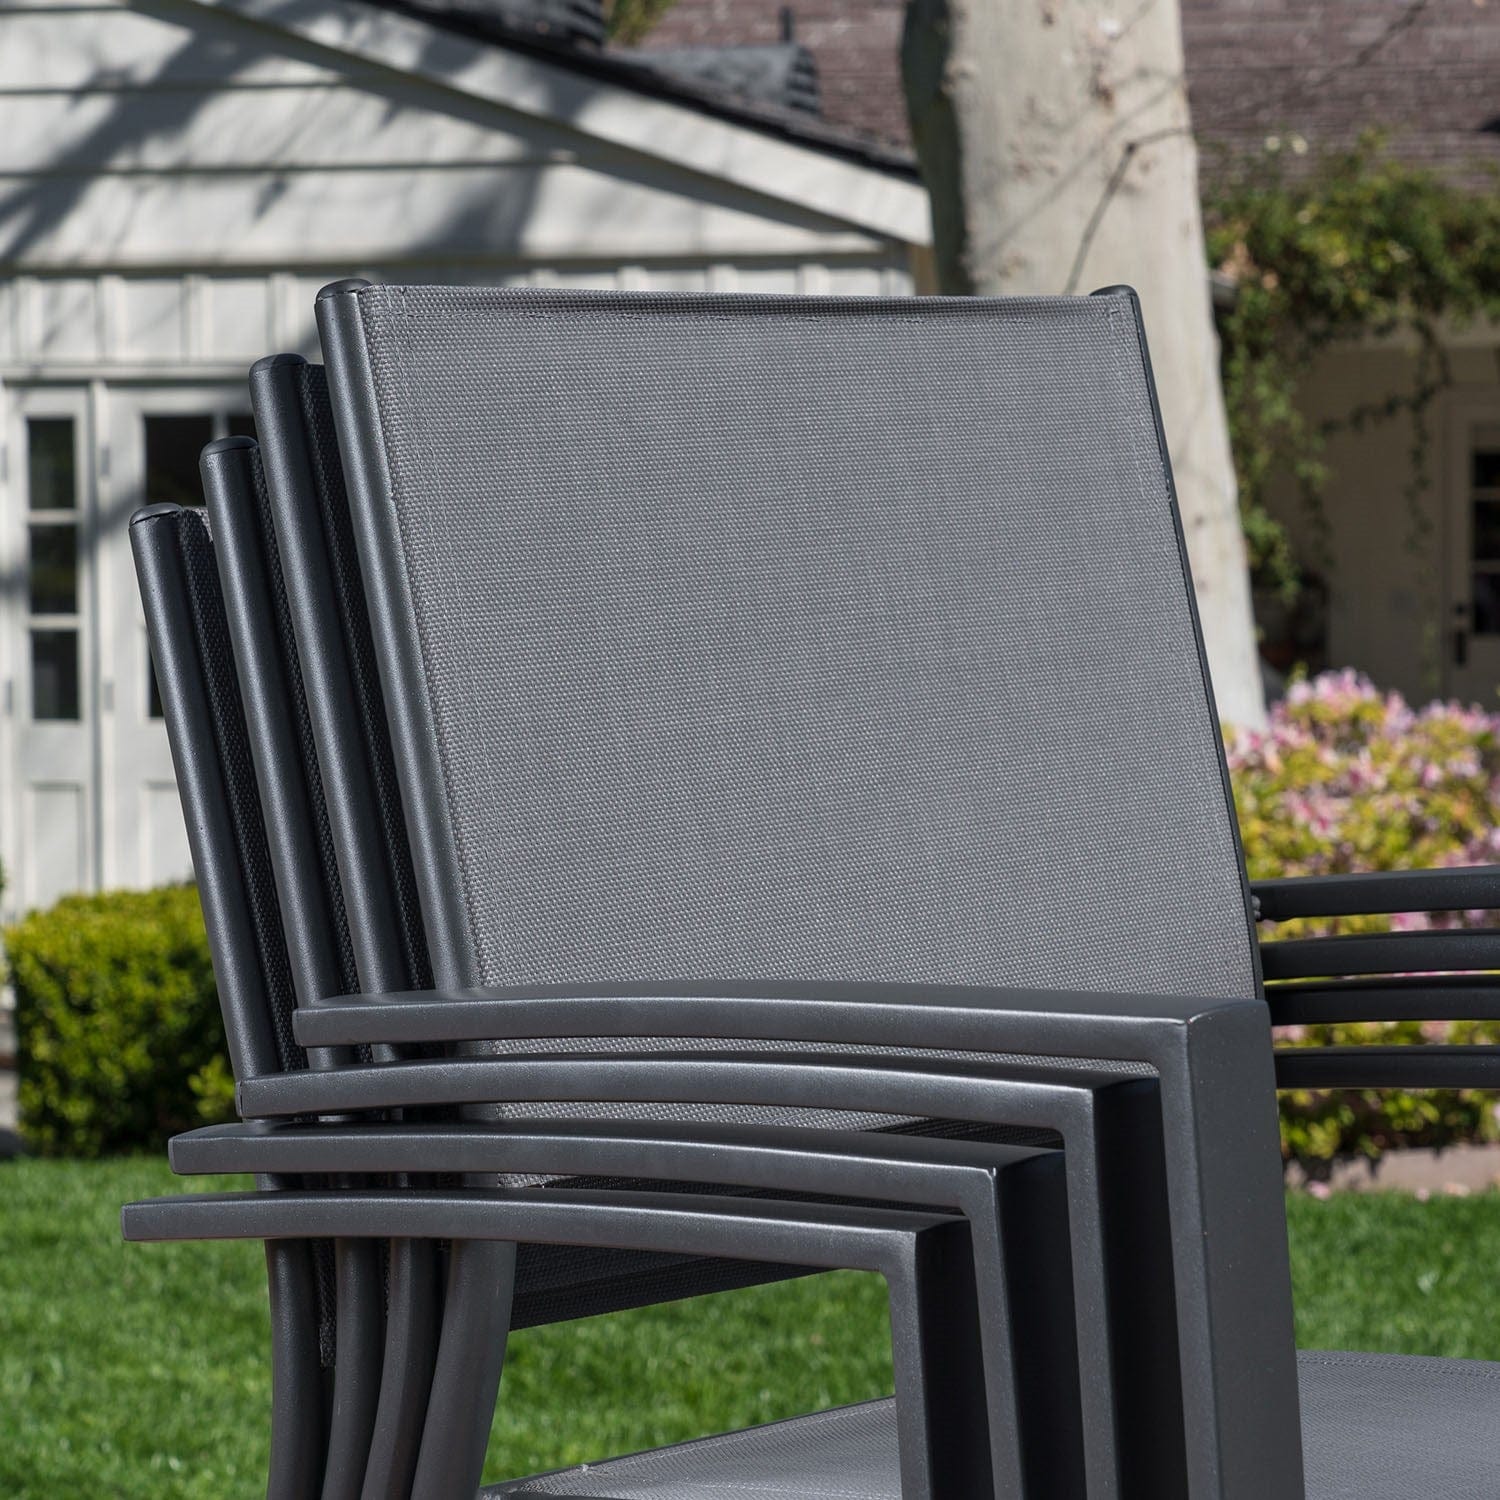 Hanover Outdoor Dining Set Hanover Naples 7-Piece Outdoor Dining Set with 6 Sling Chairs in Gray and a 63" x 35" Dining Table